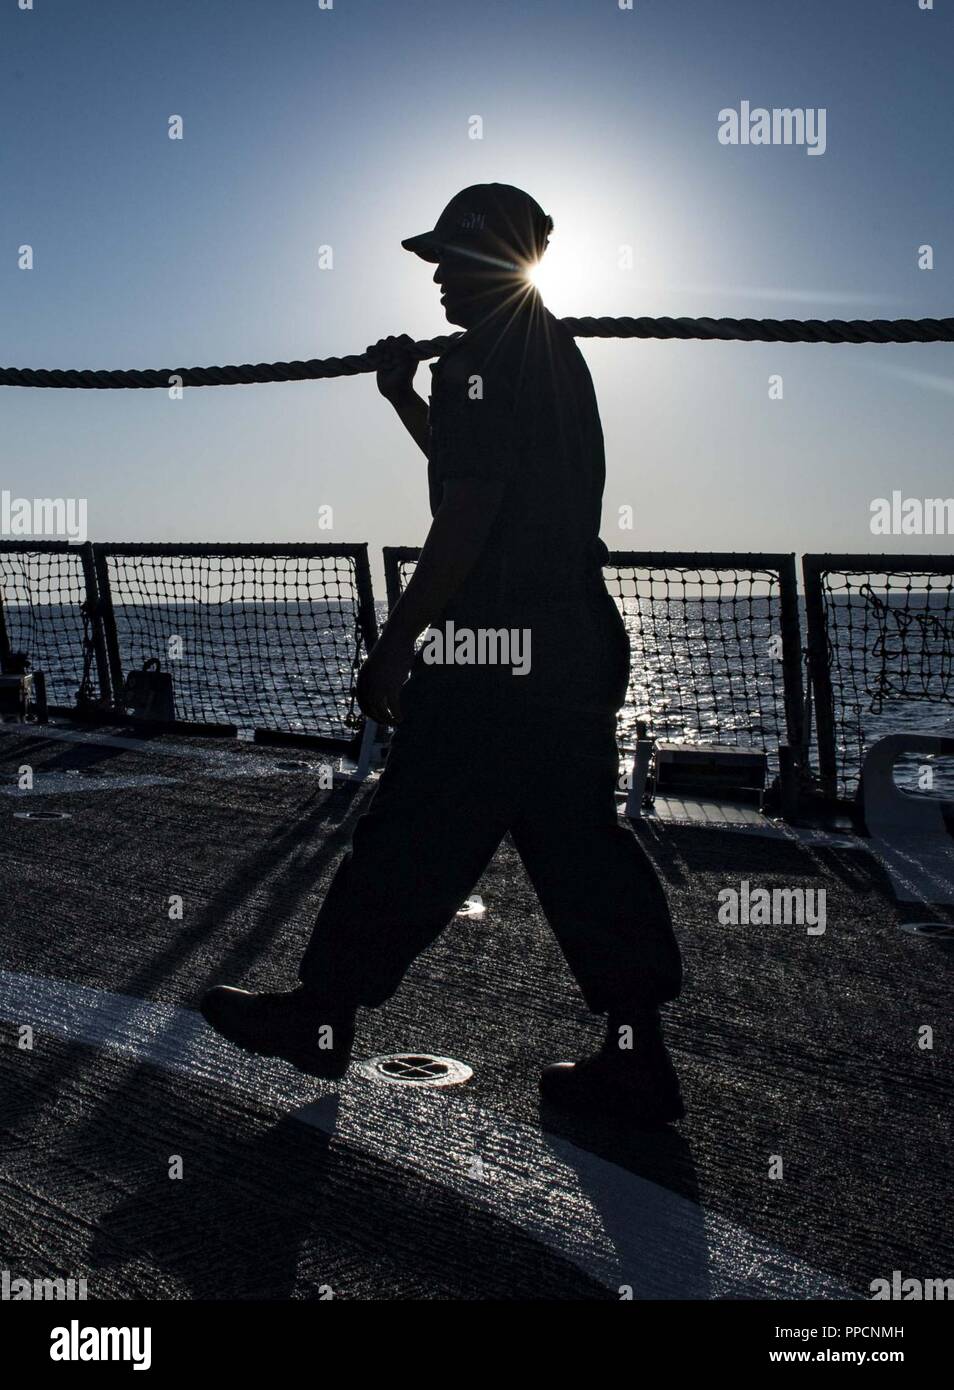 BAY, Greece (Sept. 2, 2018) Boatswain’s Mate 3rd Class Amari Jessup handles line aboard the Arleigh Burke-class guided-missile destroyer USS Carney (DDG 64) as the ship arrives in Souda Bay, Greece, Sept. 2, 2018. Carney, forward-deployed to Rota, Spain, is on its fifth patrol in the U.S. 6th Fleet area of operations in support of regional allies and partners as well as U.S. national security interests in Europe and Africa. Stock Photo